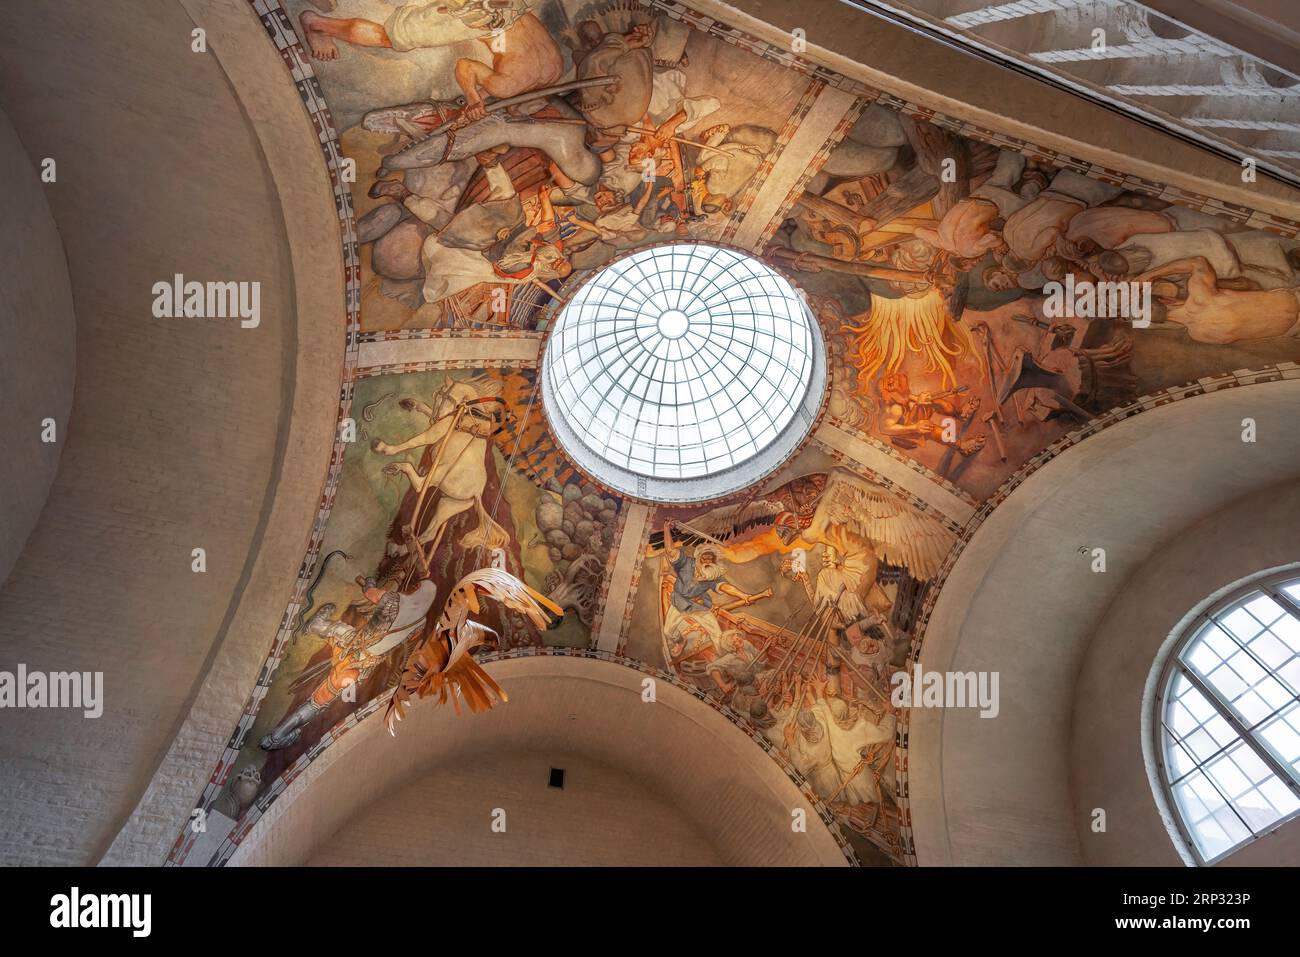 Frescoes in the Ceiling Depicting Scenes of Kalevala Epic Poem at National Museum of Finland - Helsinki, Finland Stock Photo